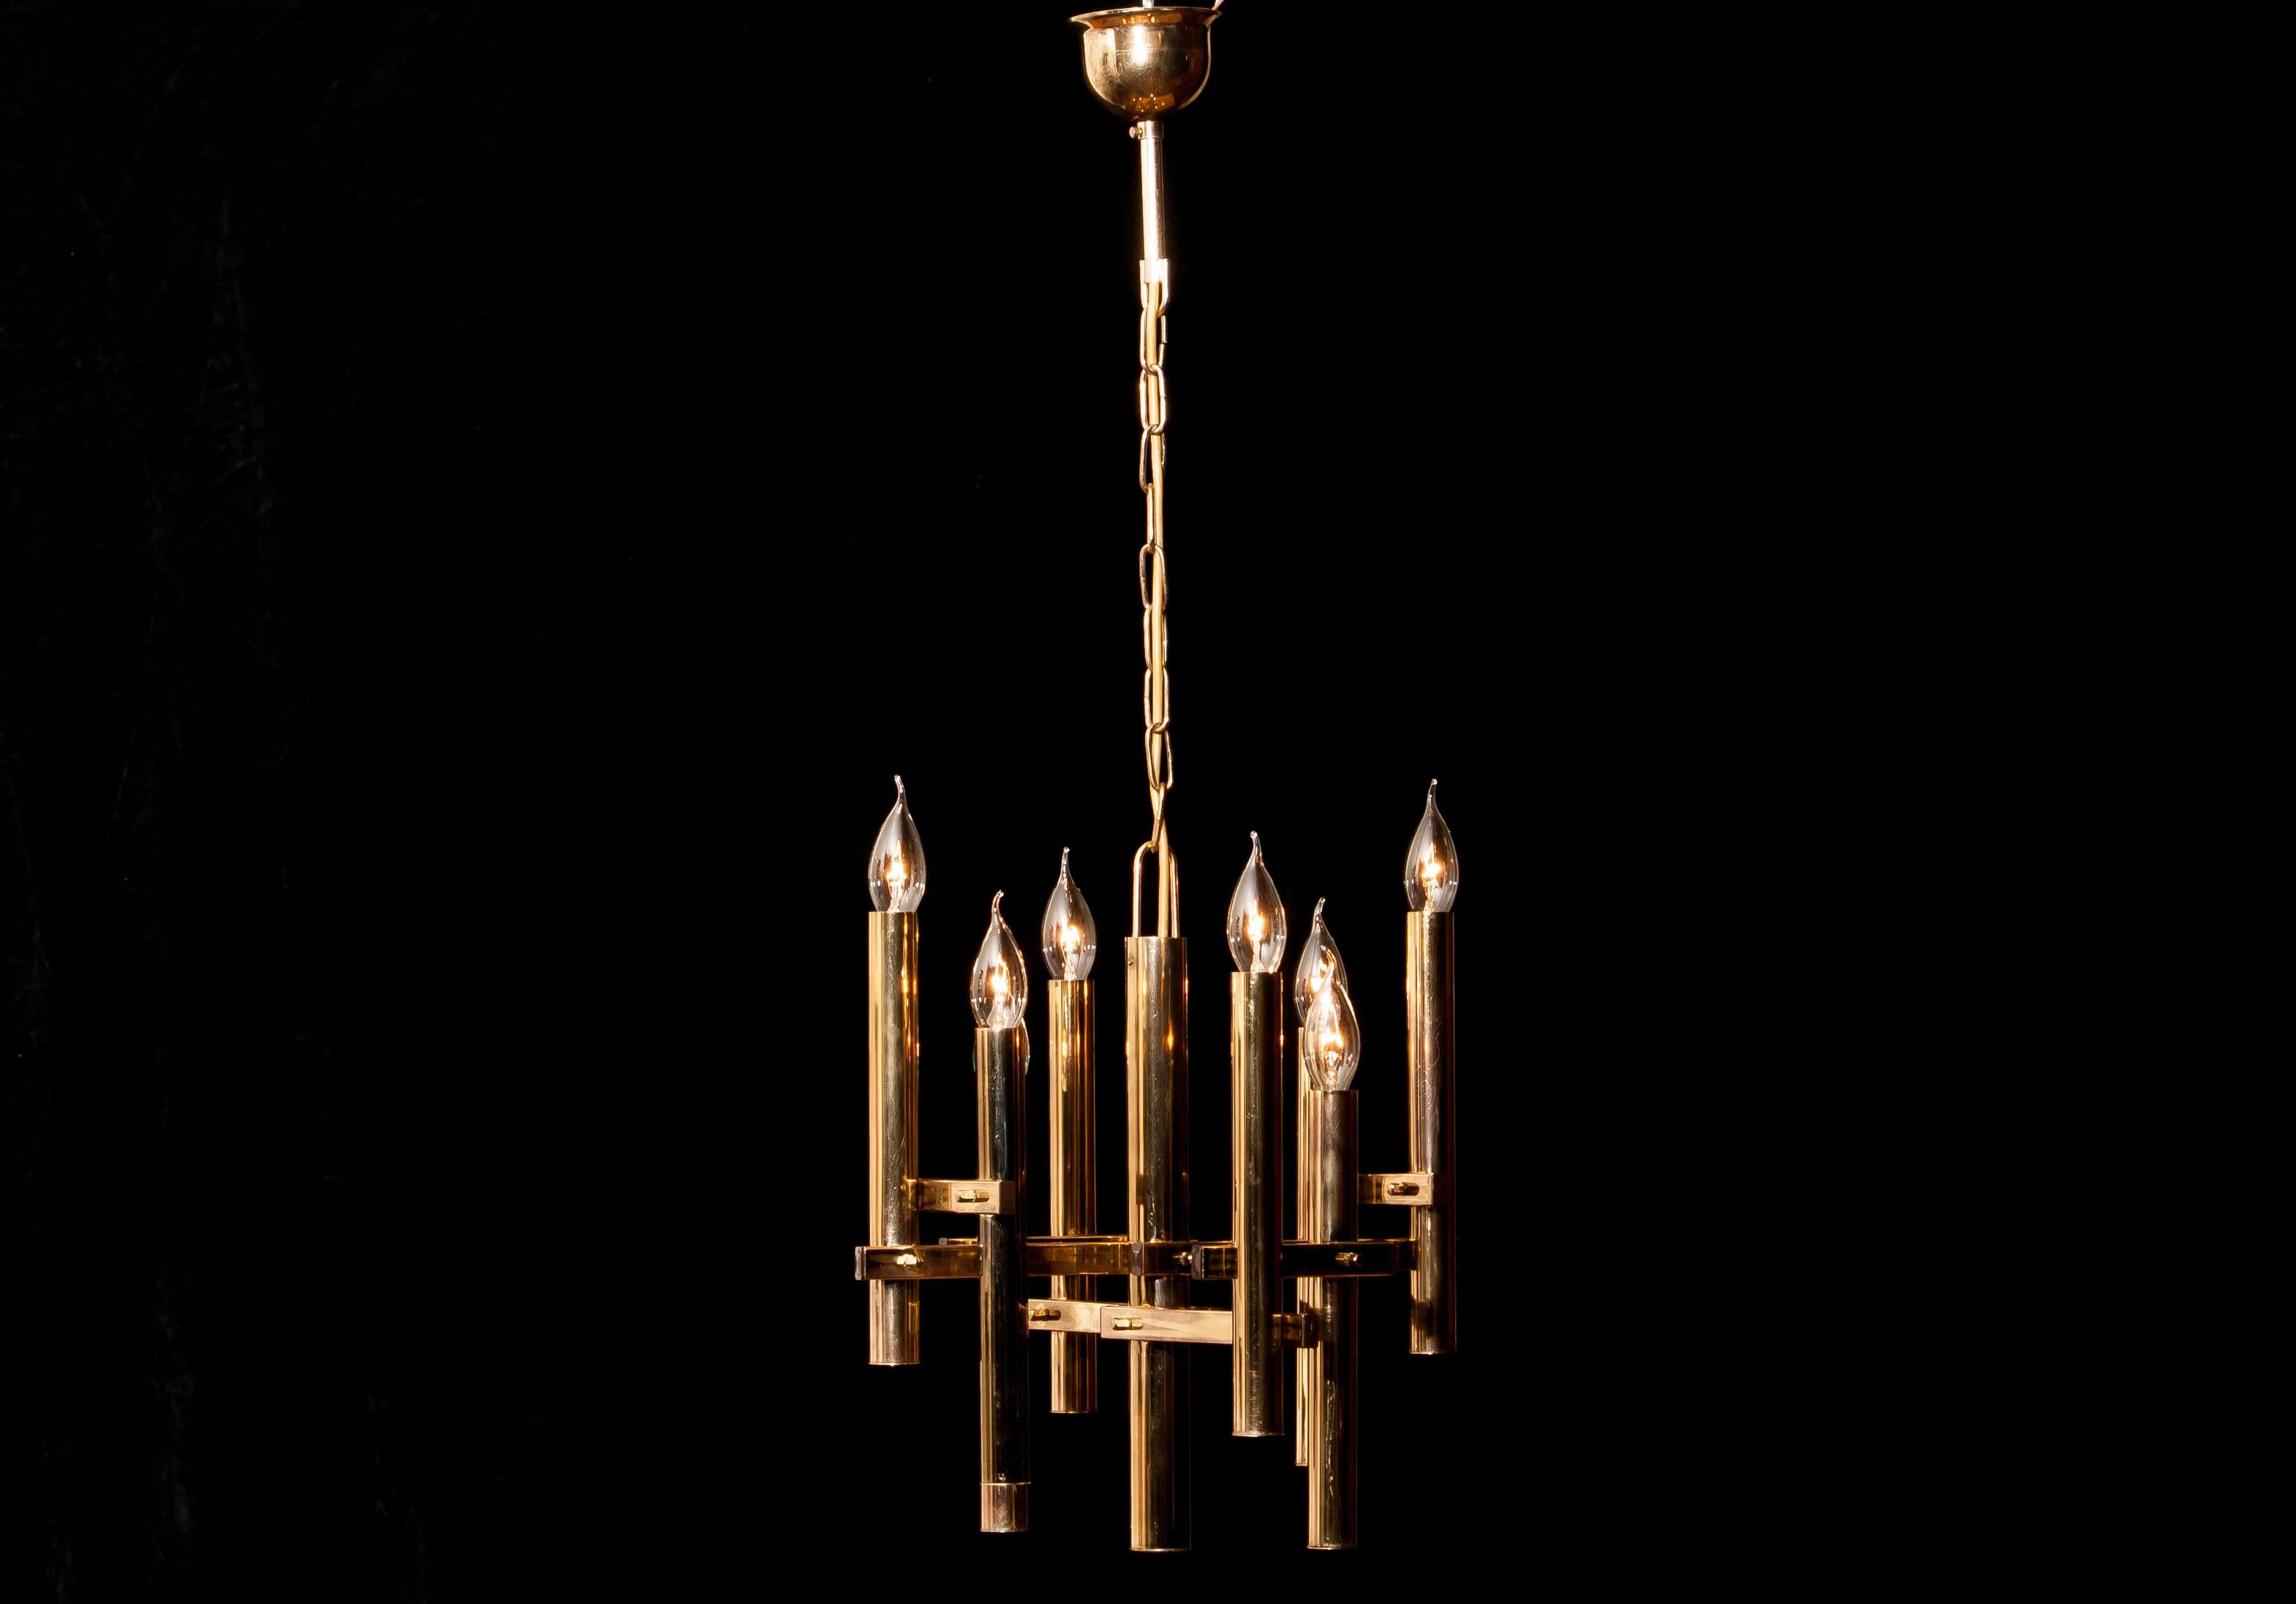 Beautiful brass pendant by Gaetano Sciolari, Italy.
This wonderful lamp has eight fittings.
The height is adjustable.
It is in excellent condition.
Period 1960s.
Dimensions: H 93 cm, ø 40 cm.